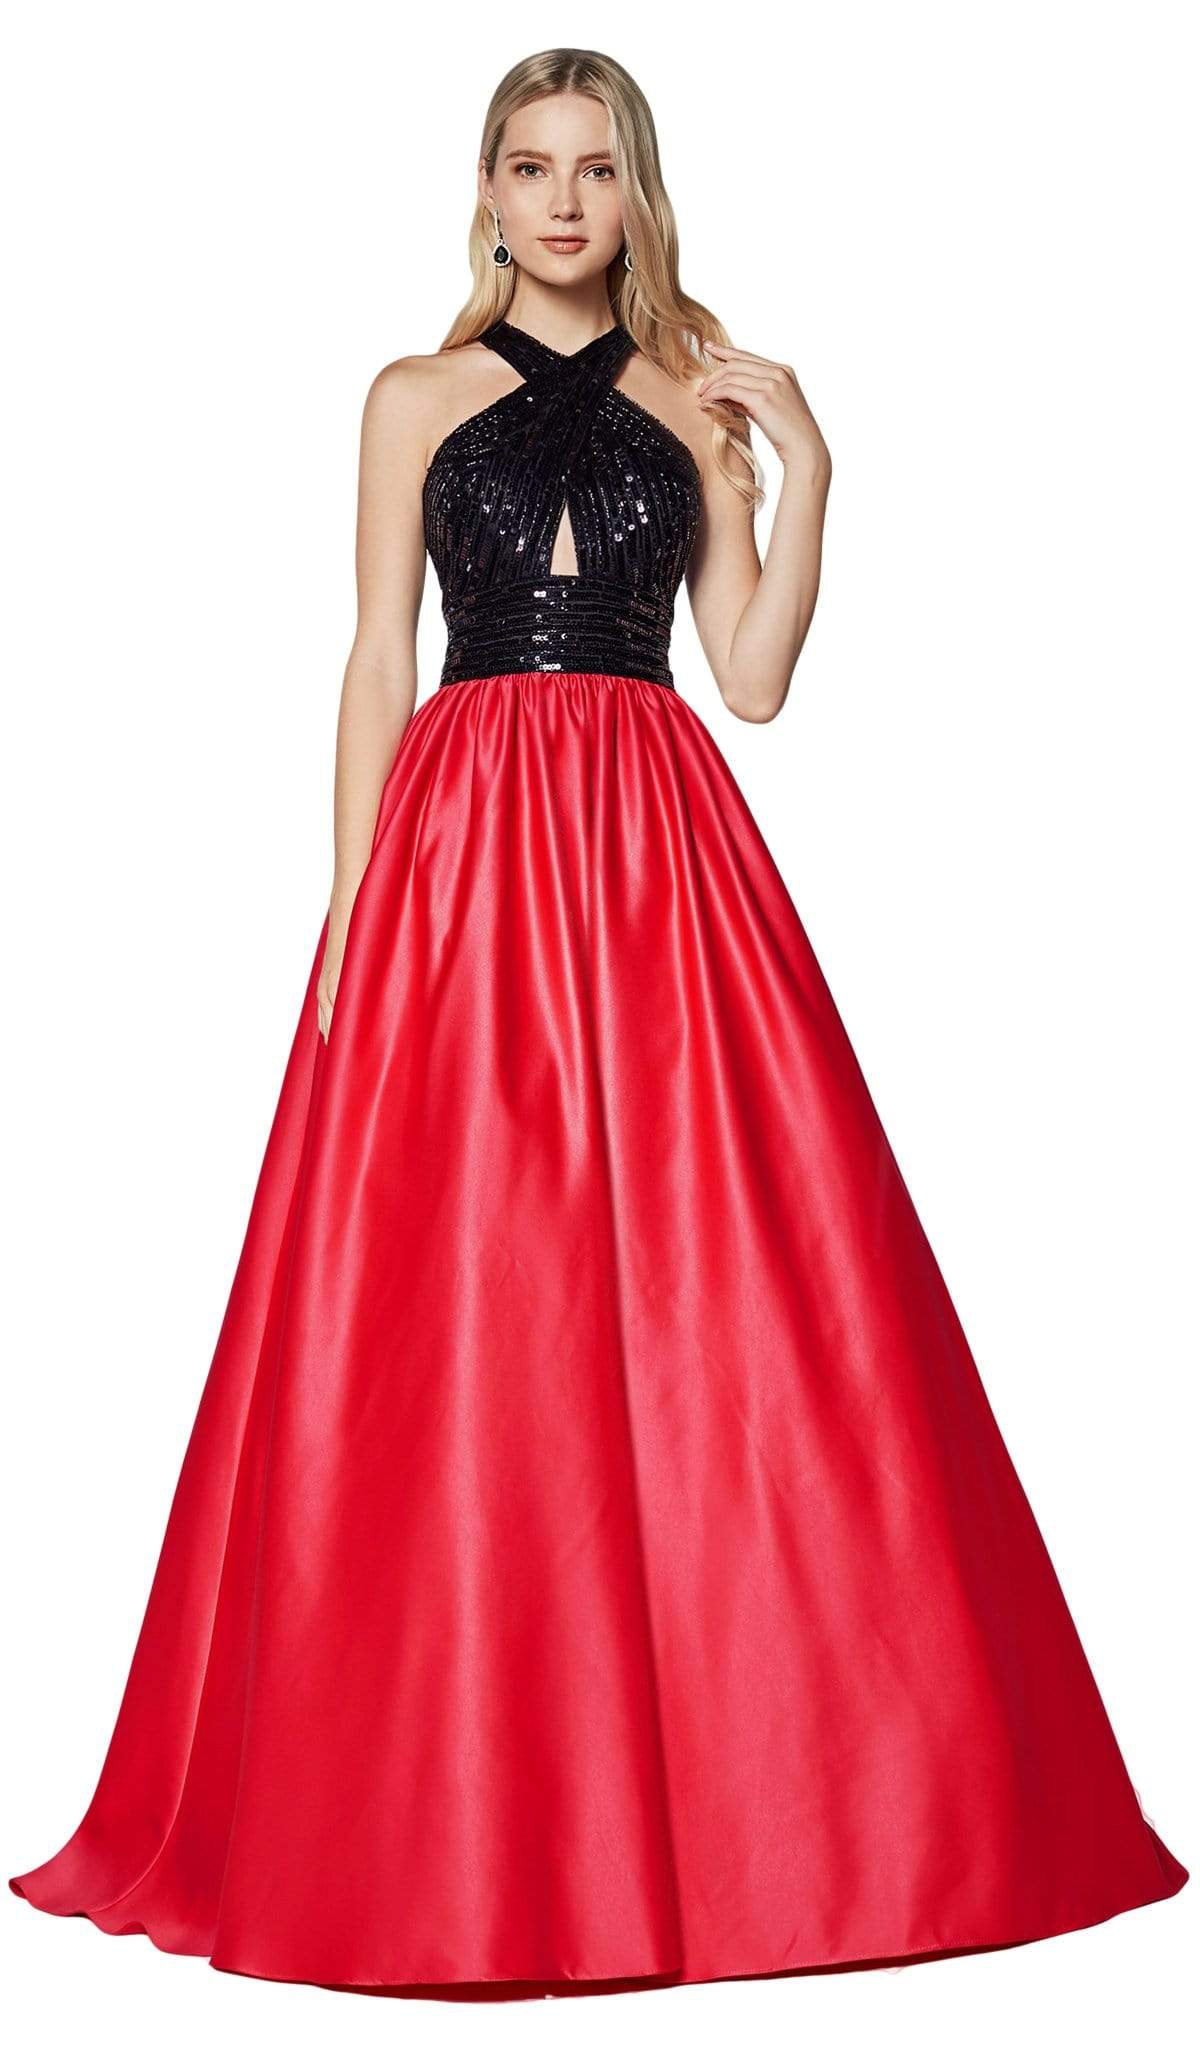 Cinderella Divine - J0234 Sequined Crisscross Cutout Bodice Gown Special Occasion Dress 2 / Black/Hot Pink